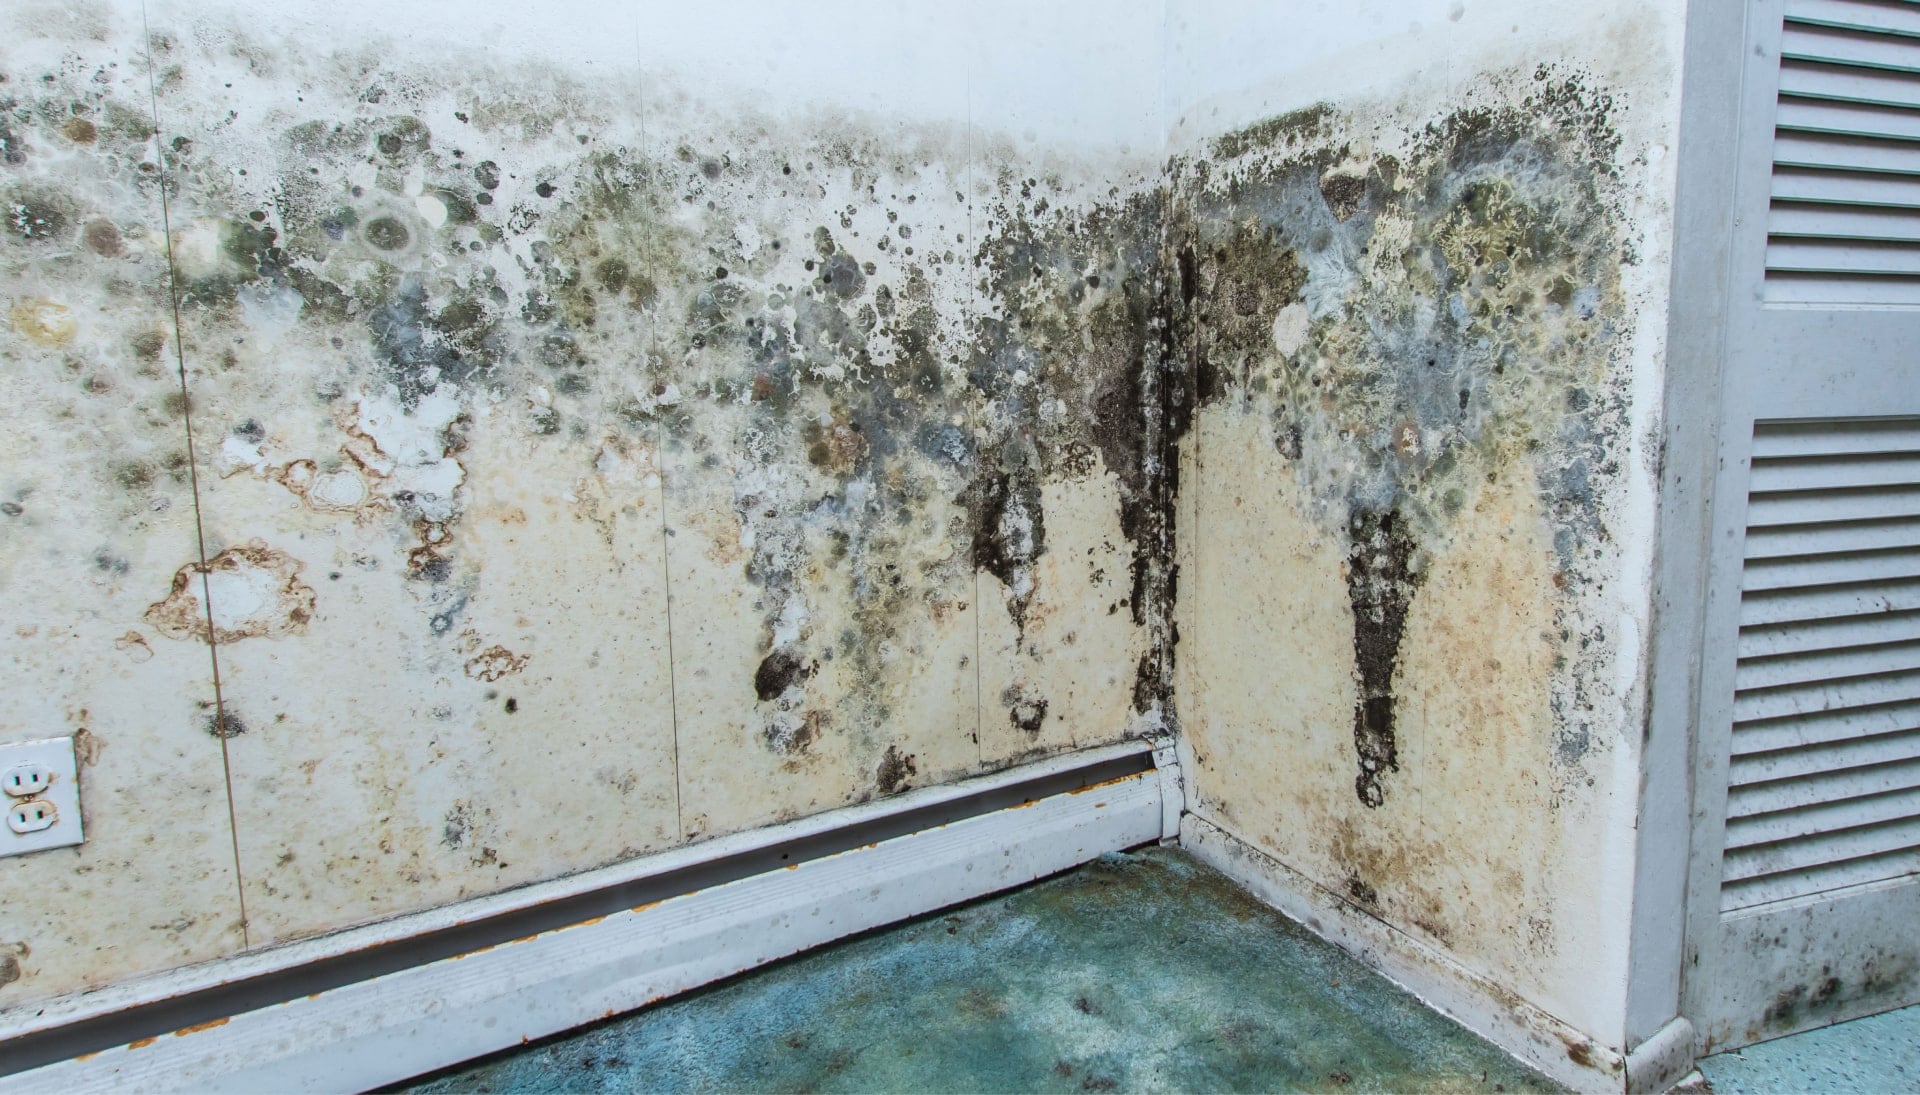 Professional mold removal, odor control, and water damage restoration service in Baltimore, Maryland.